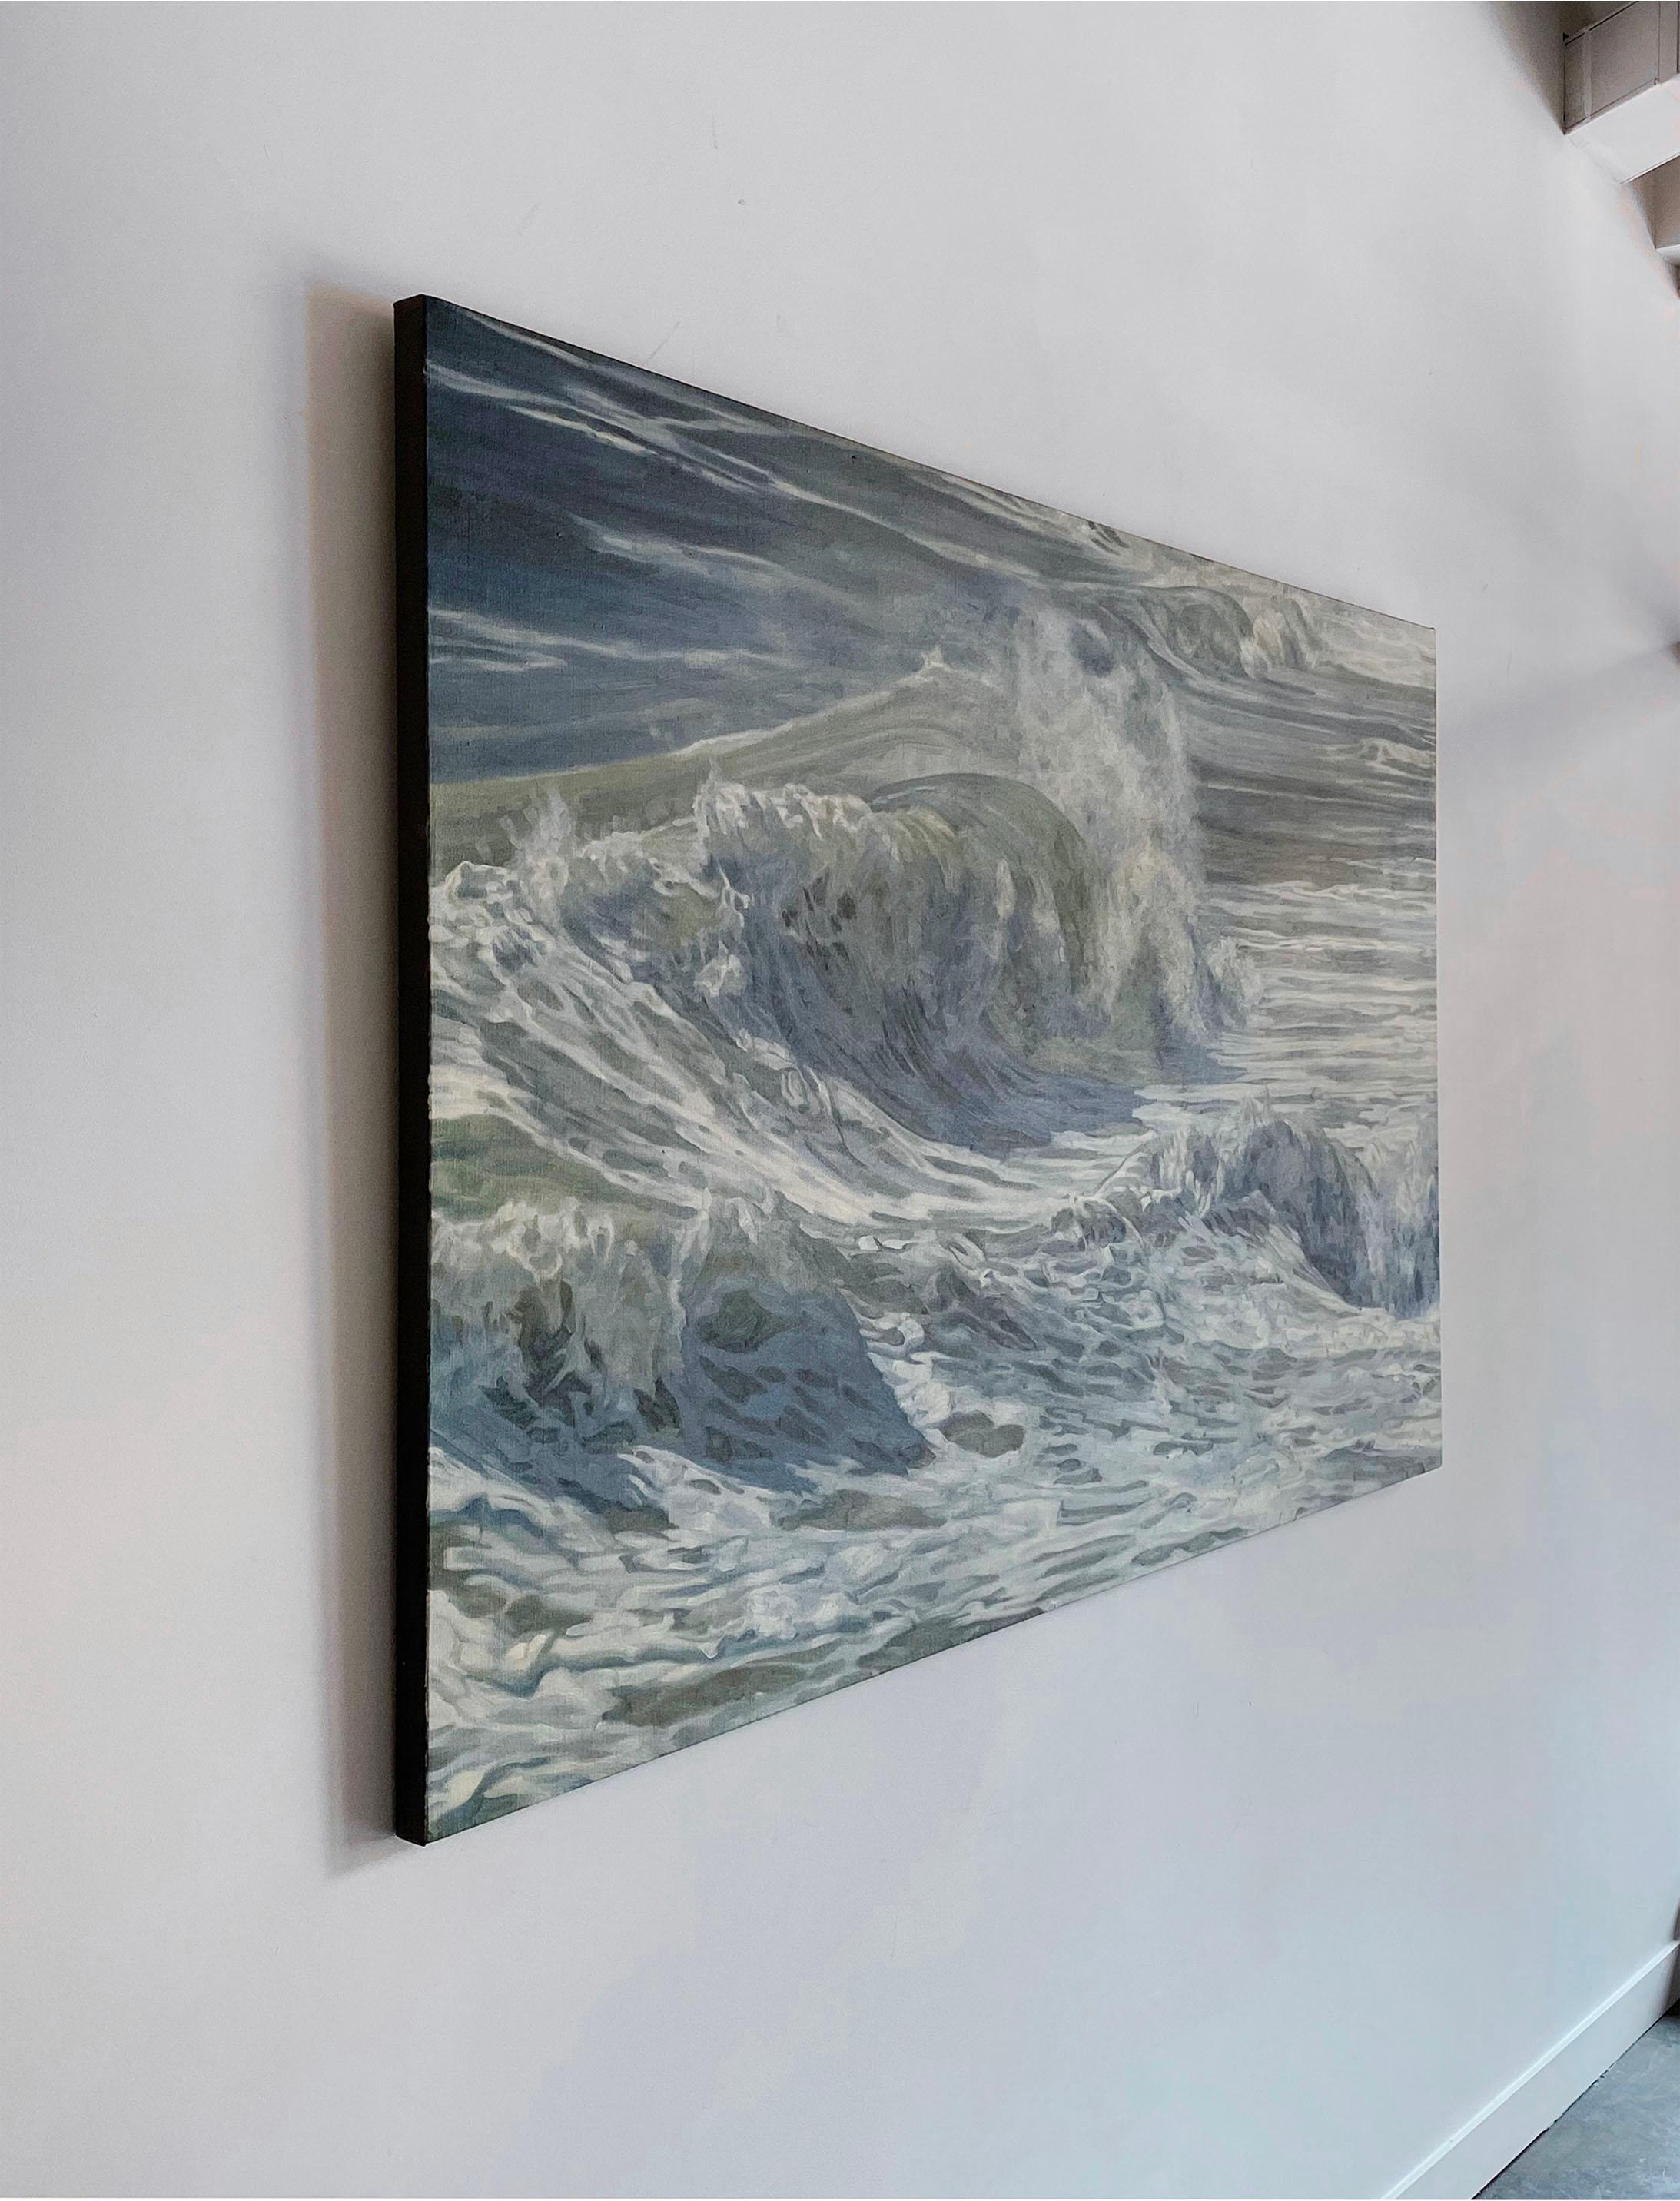 This large-scale, original oil painting by artist John Harris depicts a realistic view of rolling and crashing ocean waves. A highly detailed statement piece, it balances the weight of an ocean wave against spraying sea mist. Sea green, muted ocean